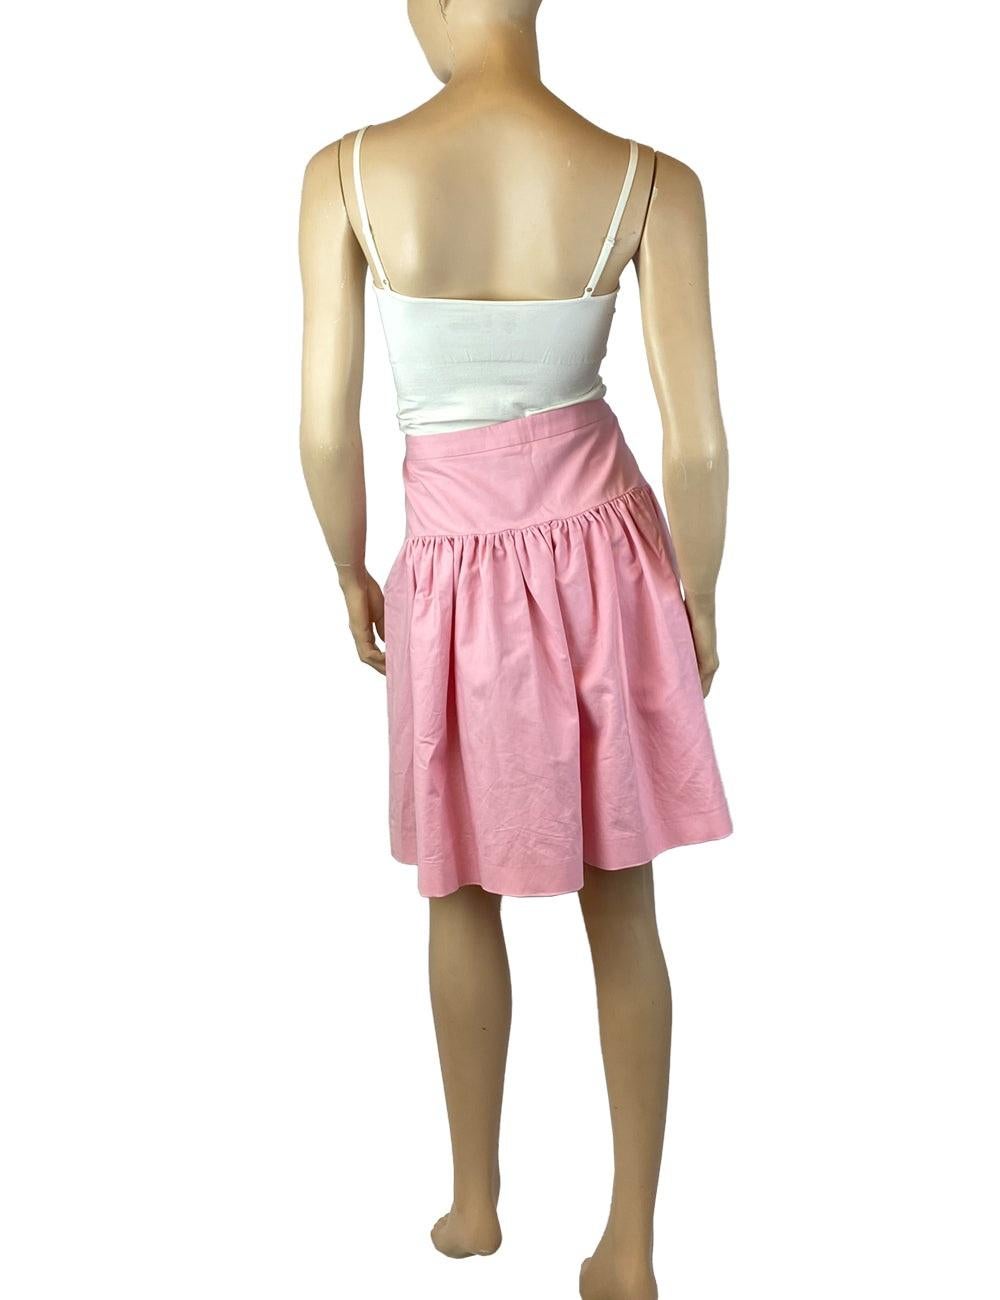 Boutique Moschino EU 40 Pink Circle Skirt In Excellent Condition For Sale In Amman, JO